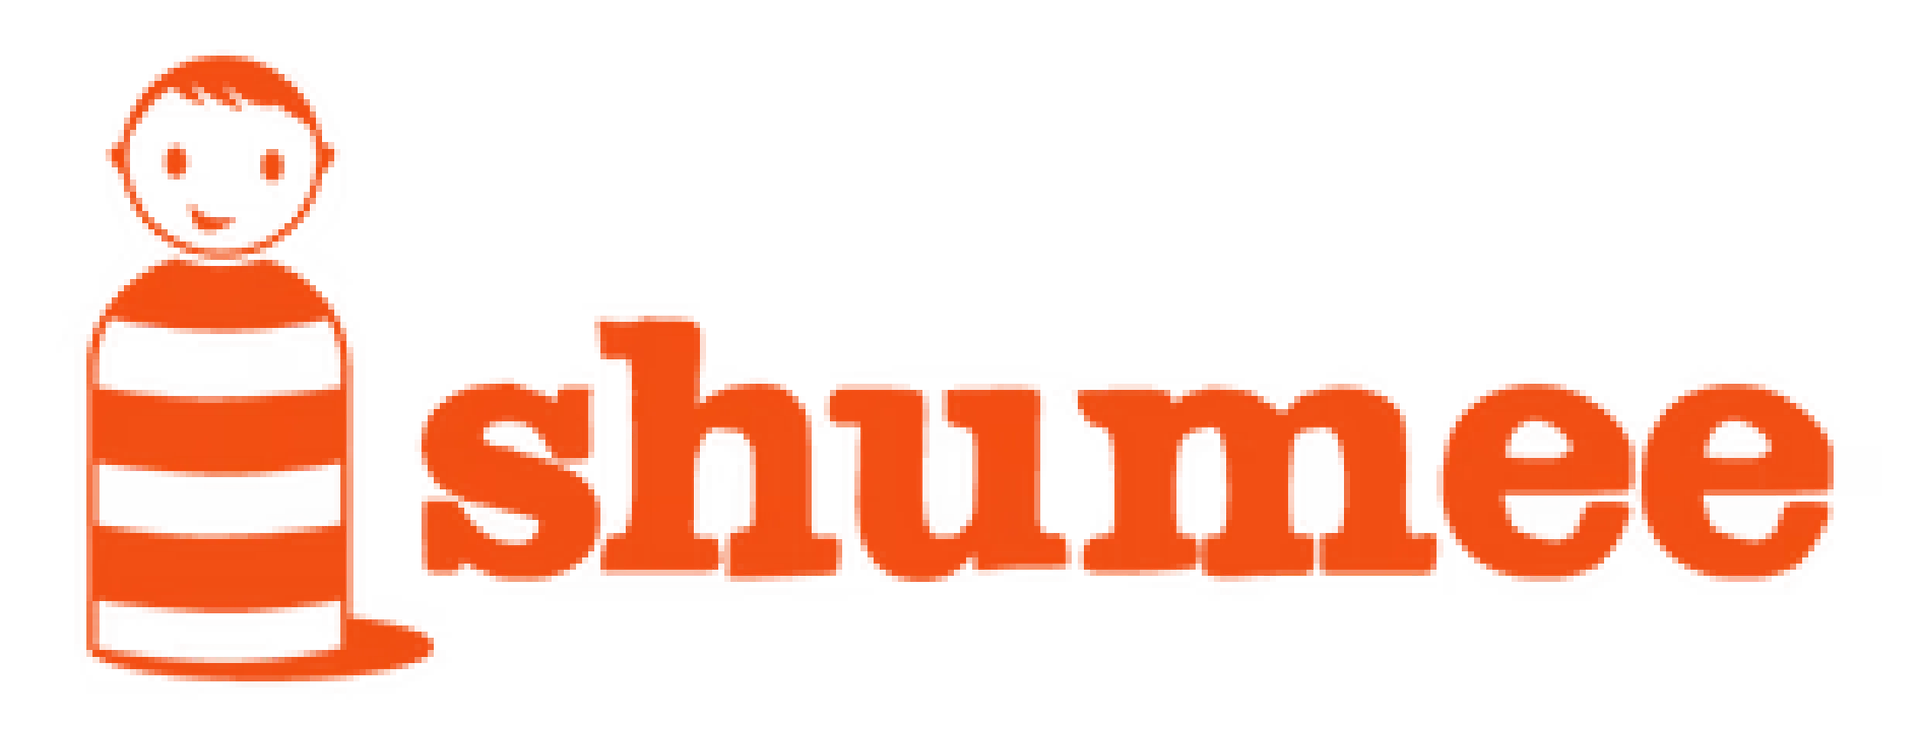 SHUMEE TOYS logo. Current catalogue